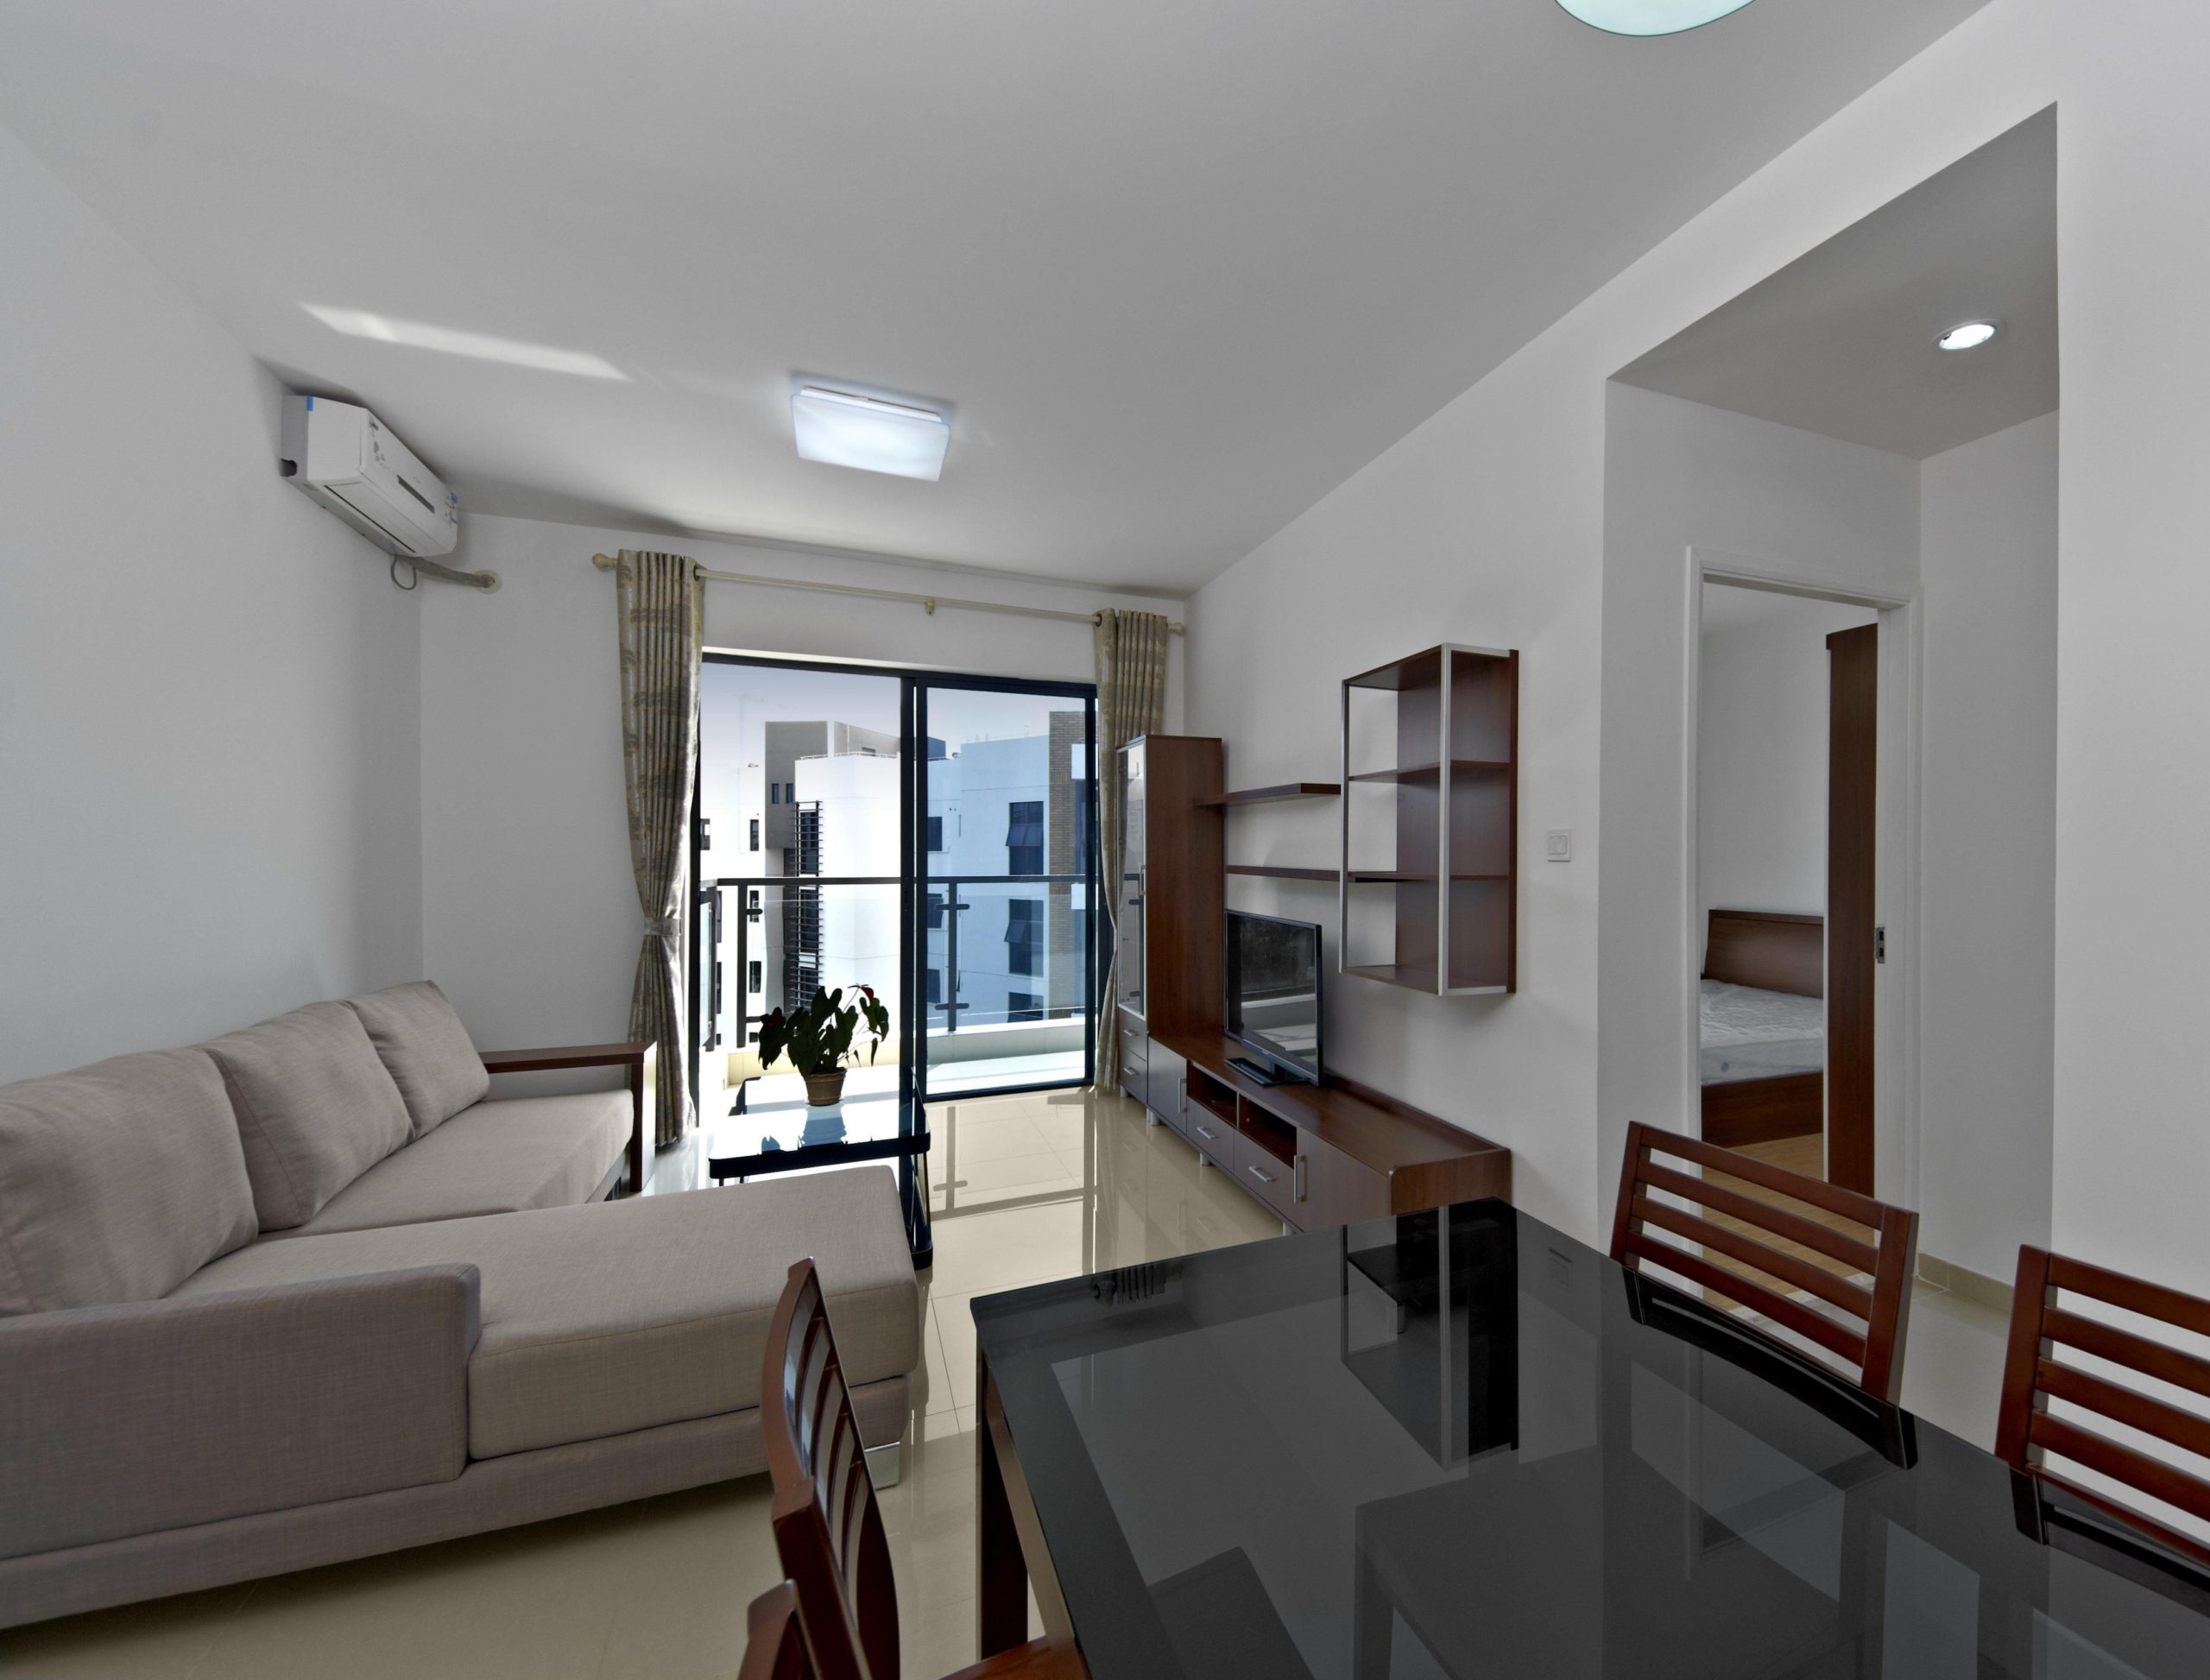 Featured image for “NICE one bedroom for rent in Shekou”